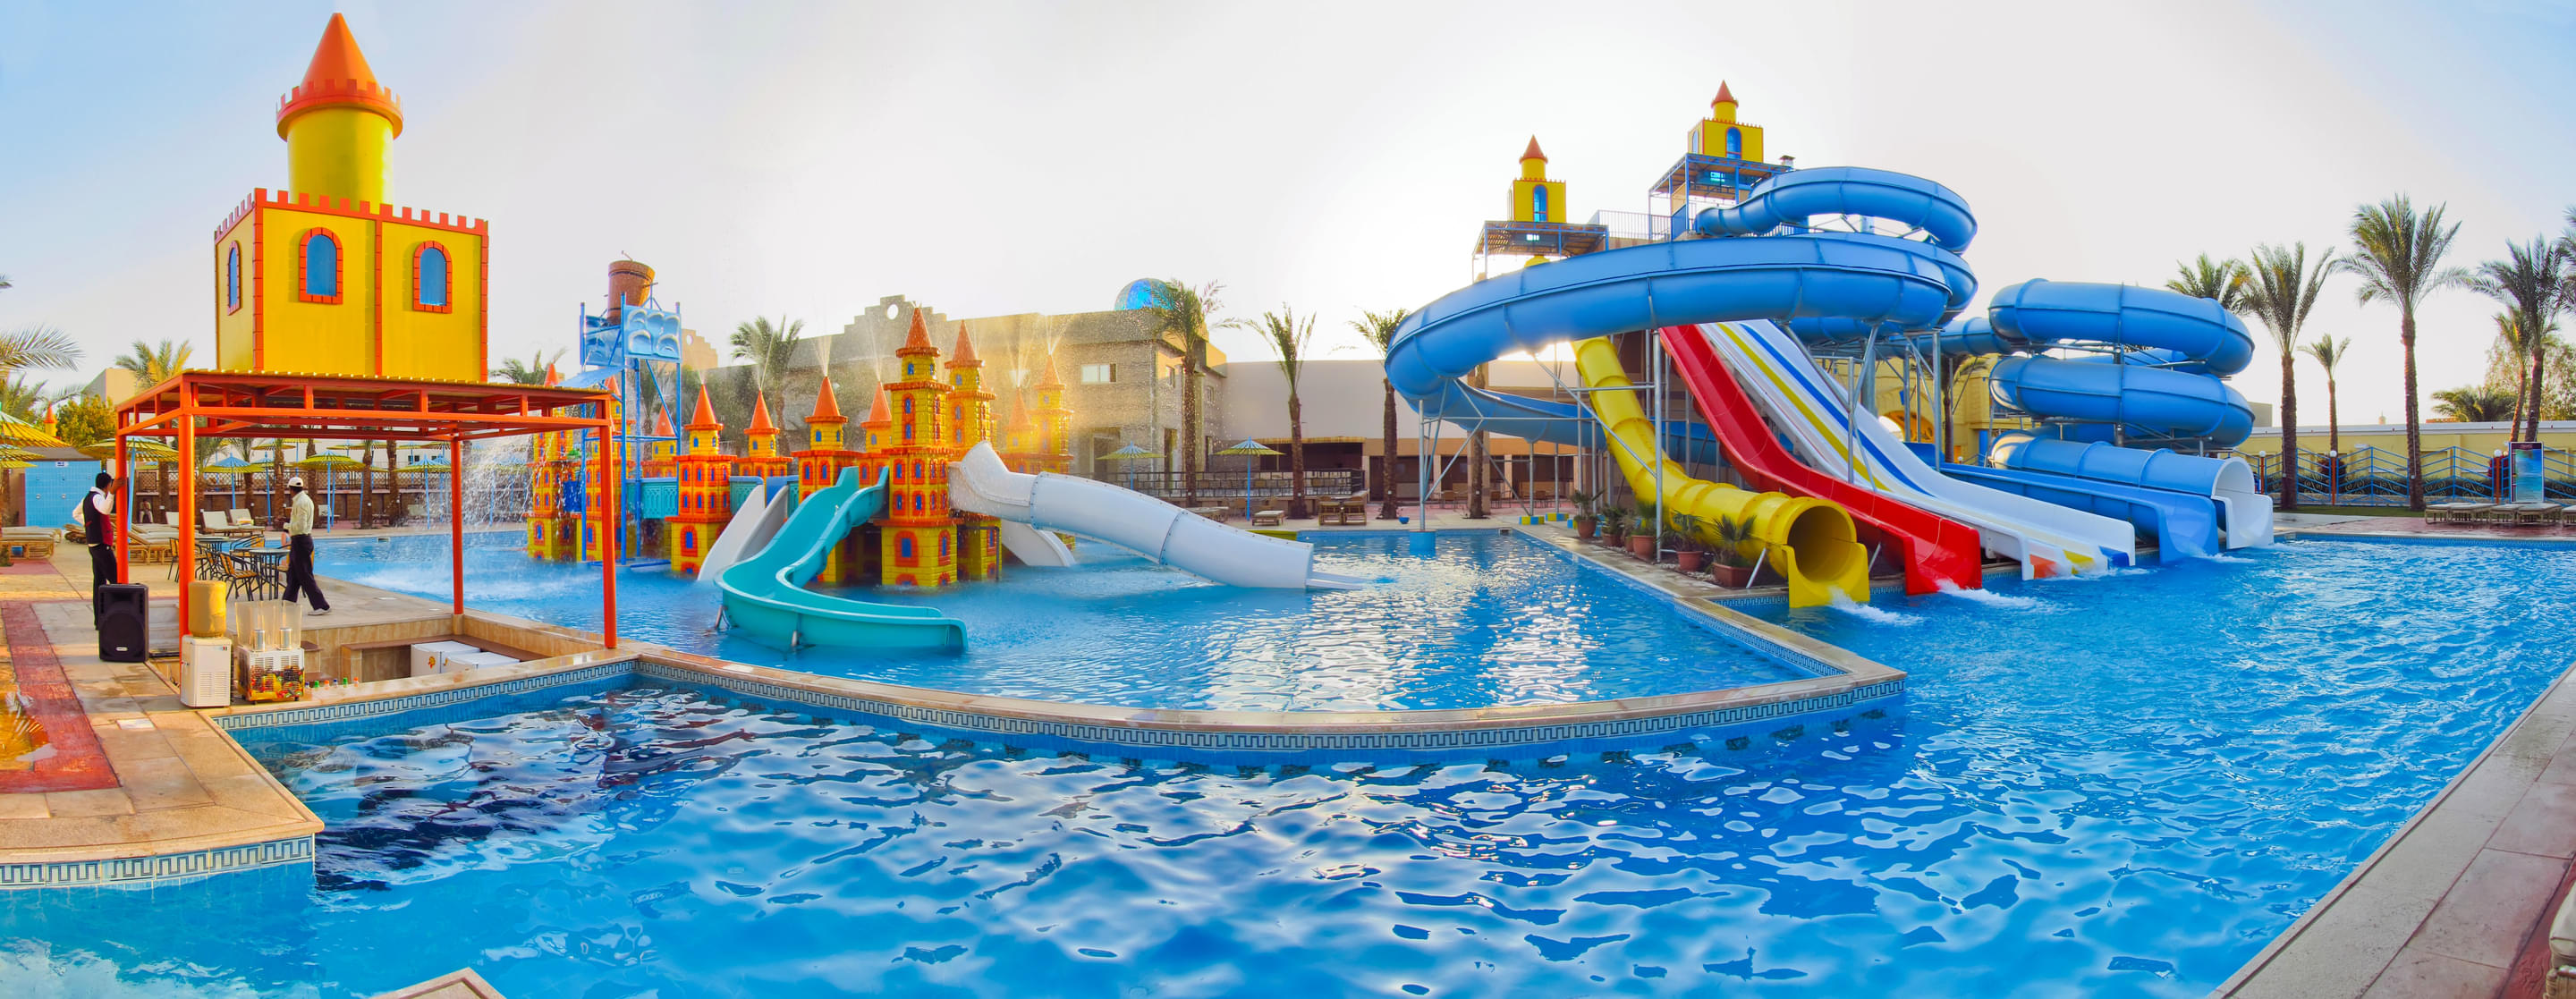 Best Water Parks in England